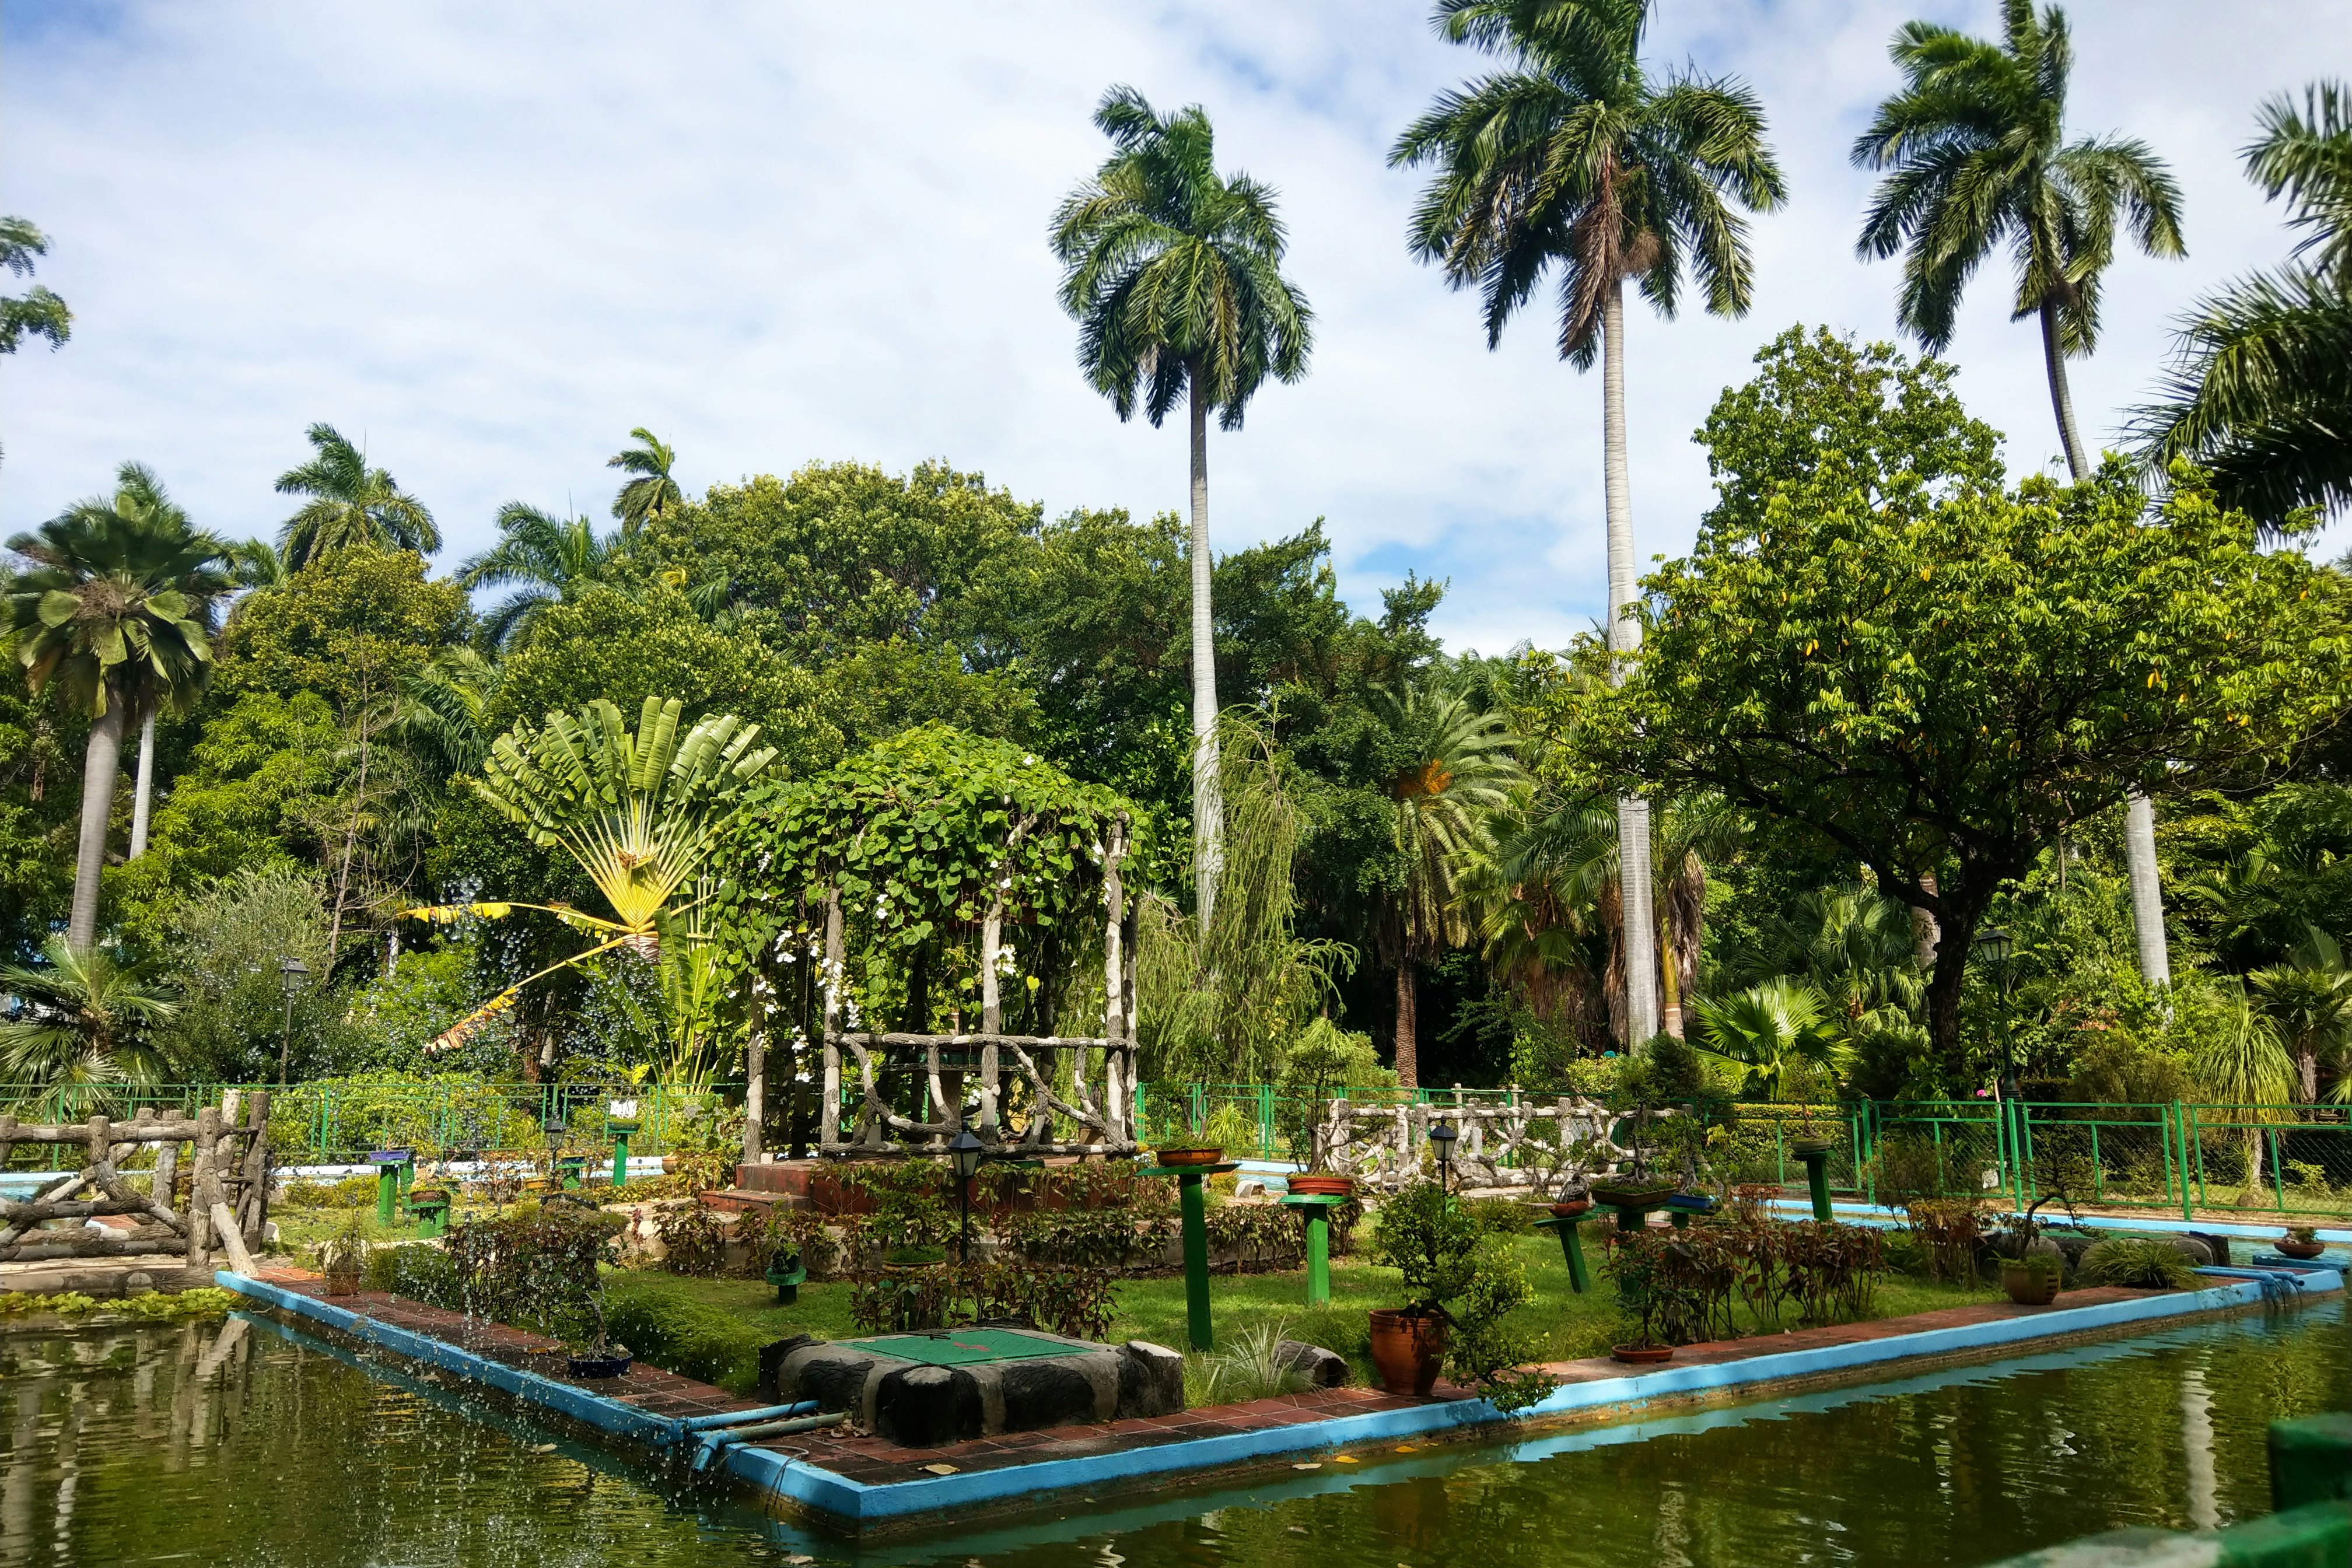 Lush green trees of varying heights surround a small pond and large water feature filled with grass and small structures; Historic Havana sites